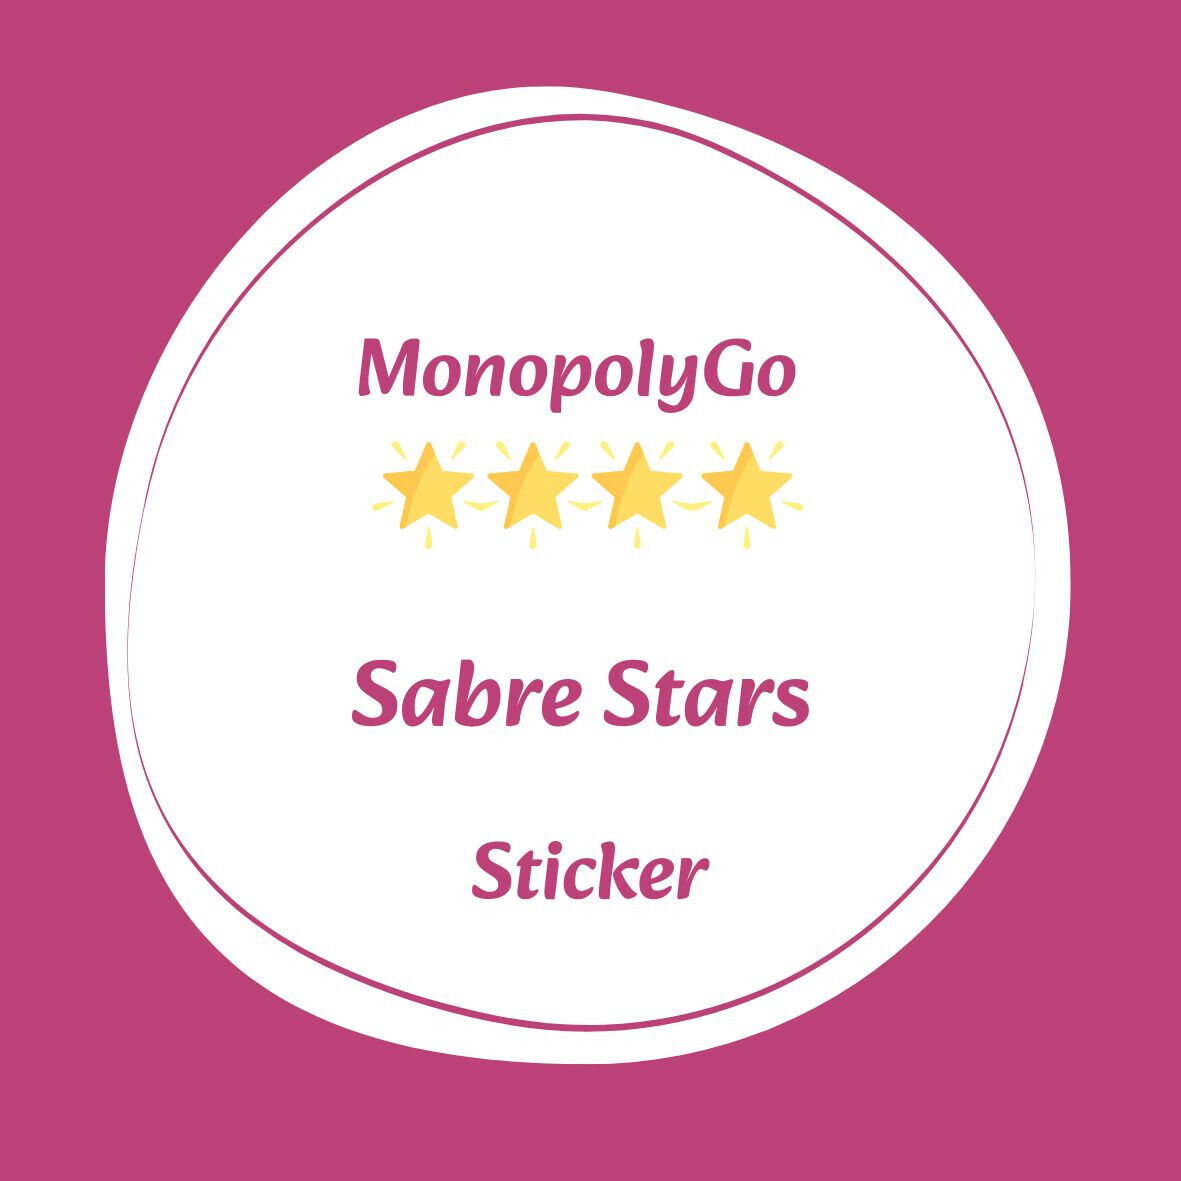 Sabre Stars Monopoly GO 4 Star ⭐️⭐️⭐️⭐️ Stickers -⚡️Cheap Fast DELIVERY⚡️